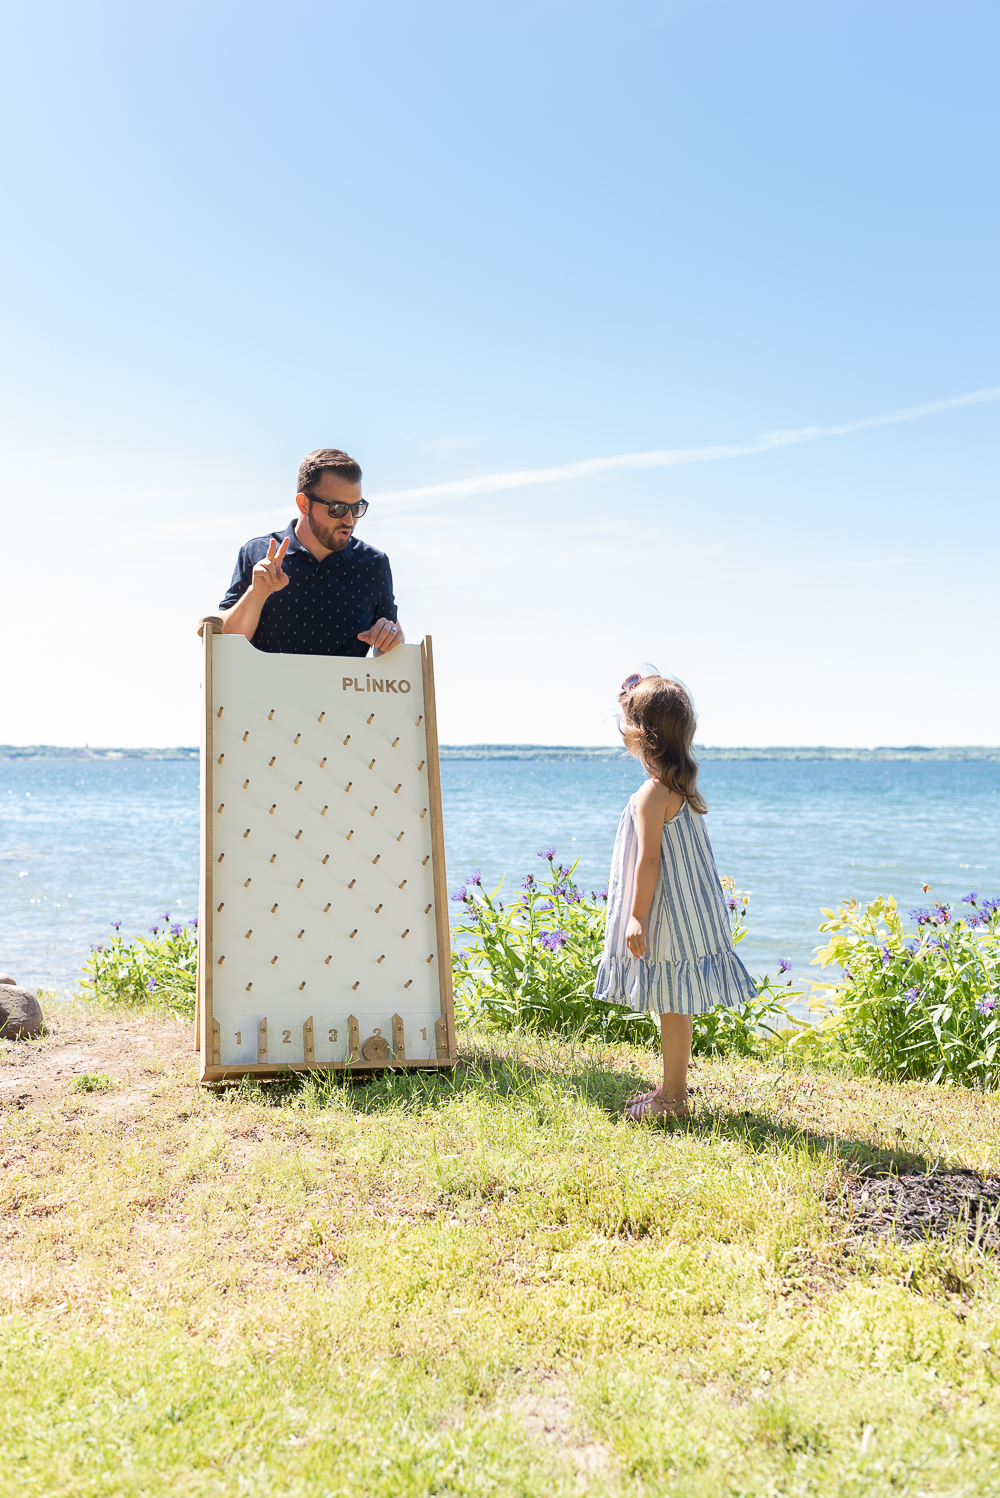 Who doesn't love Plinko? This game is the perfect addition to backyard parties (kid or adult parties), school carnivals, or as part of a kids playroom. It will provide lots of fun with family and friends. It's a classic game that crosses all generations, and we have the free DIY plans for you.